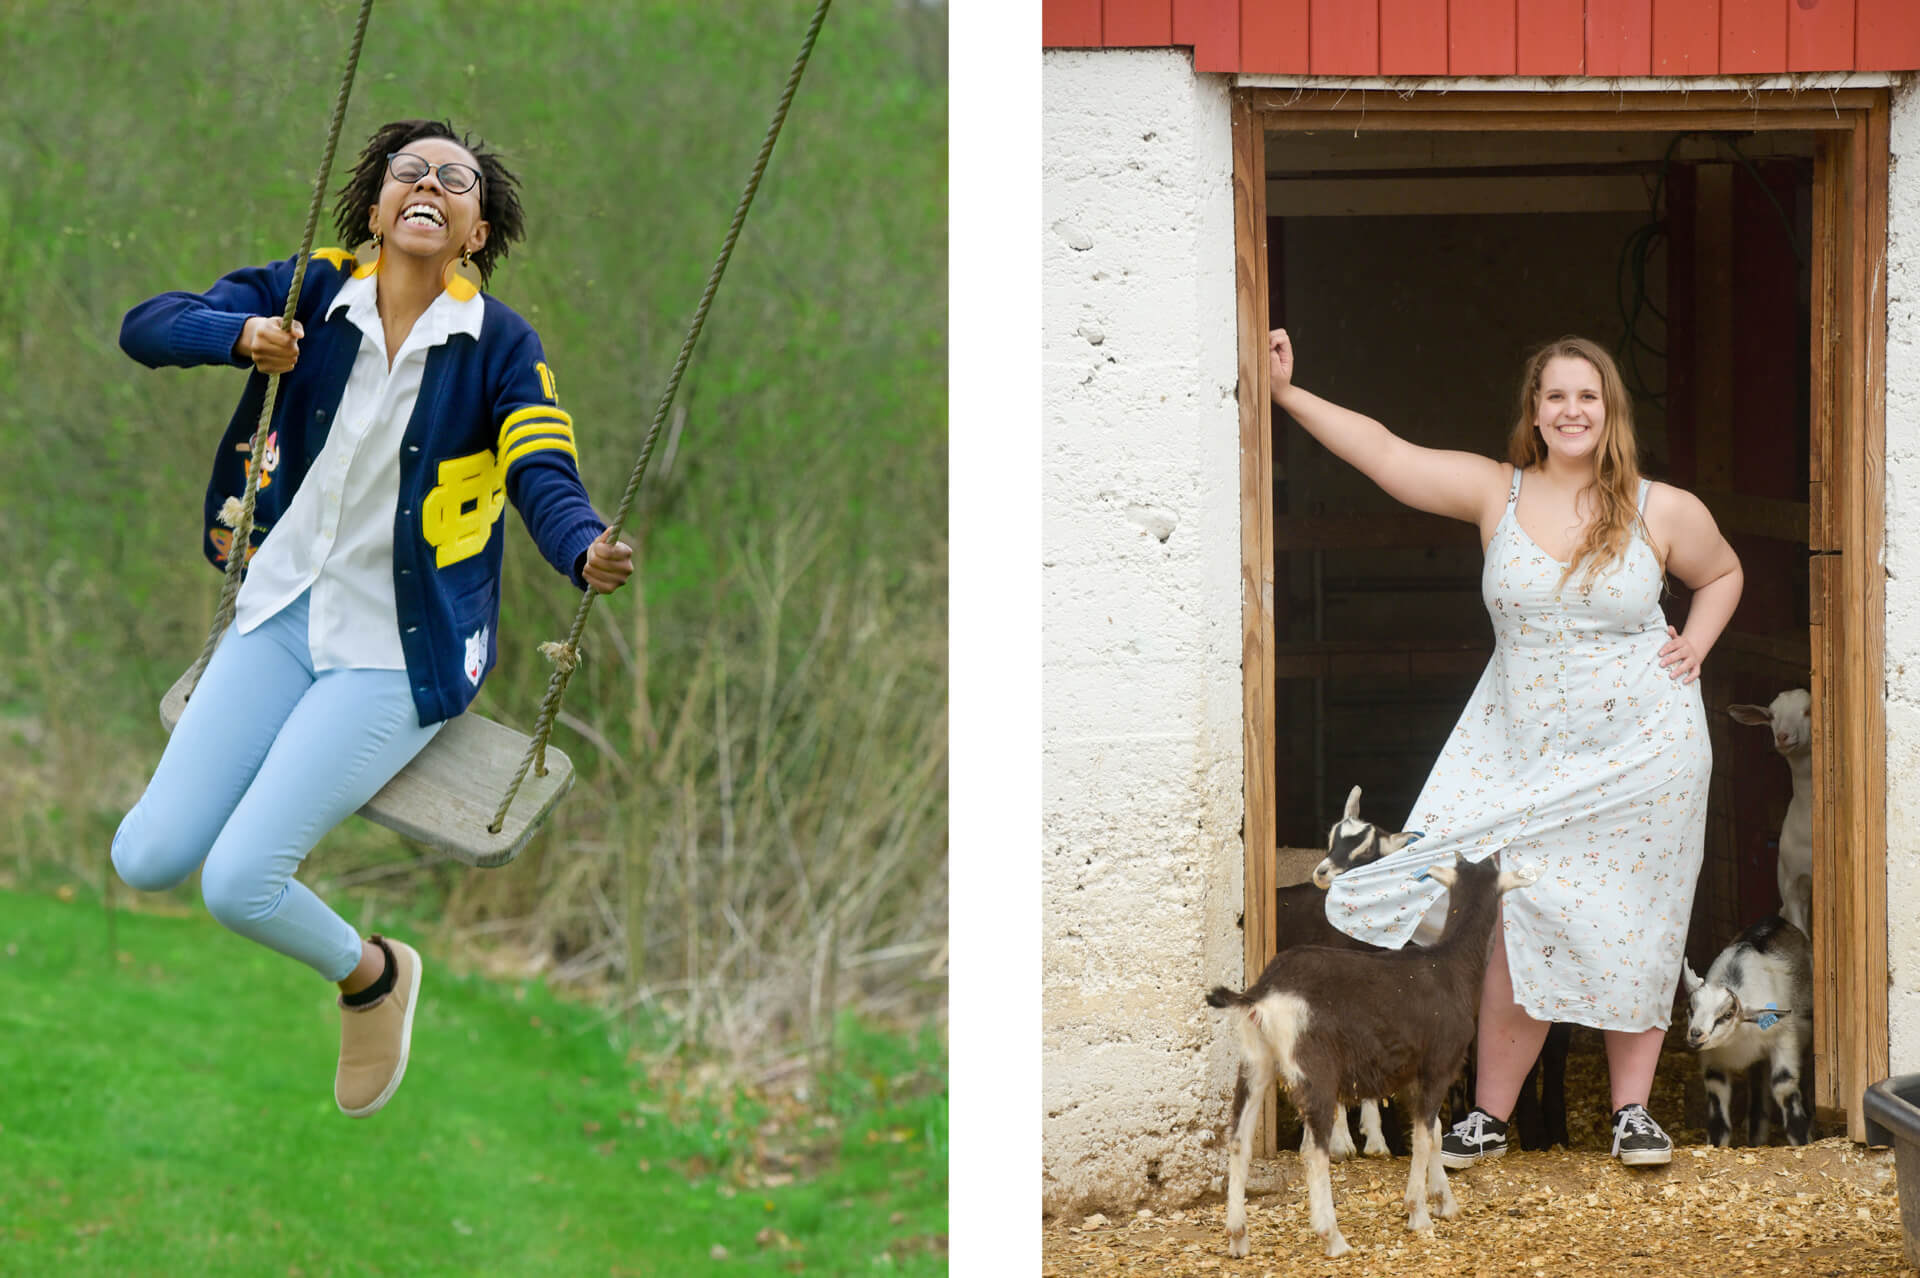 For near Oakland County Michigan seniors looking for affordable photography sessions that are fun and organic so the photos stay fresh and fun featuring Country Day theater senior and a 4-H senior from Troy Athens High School.